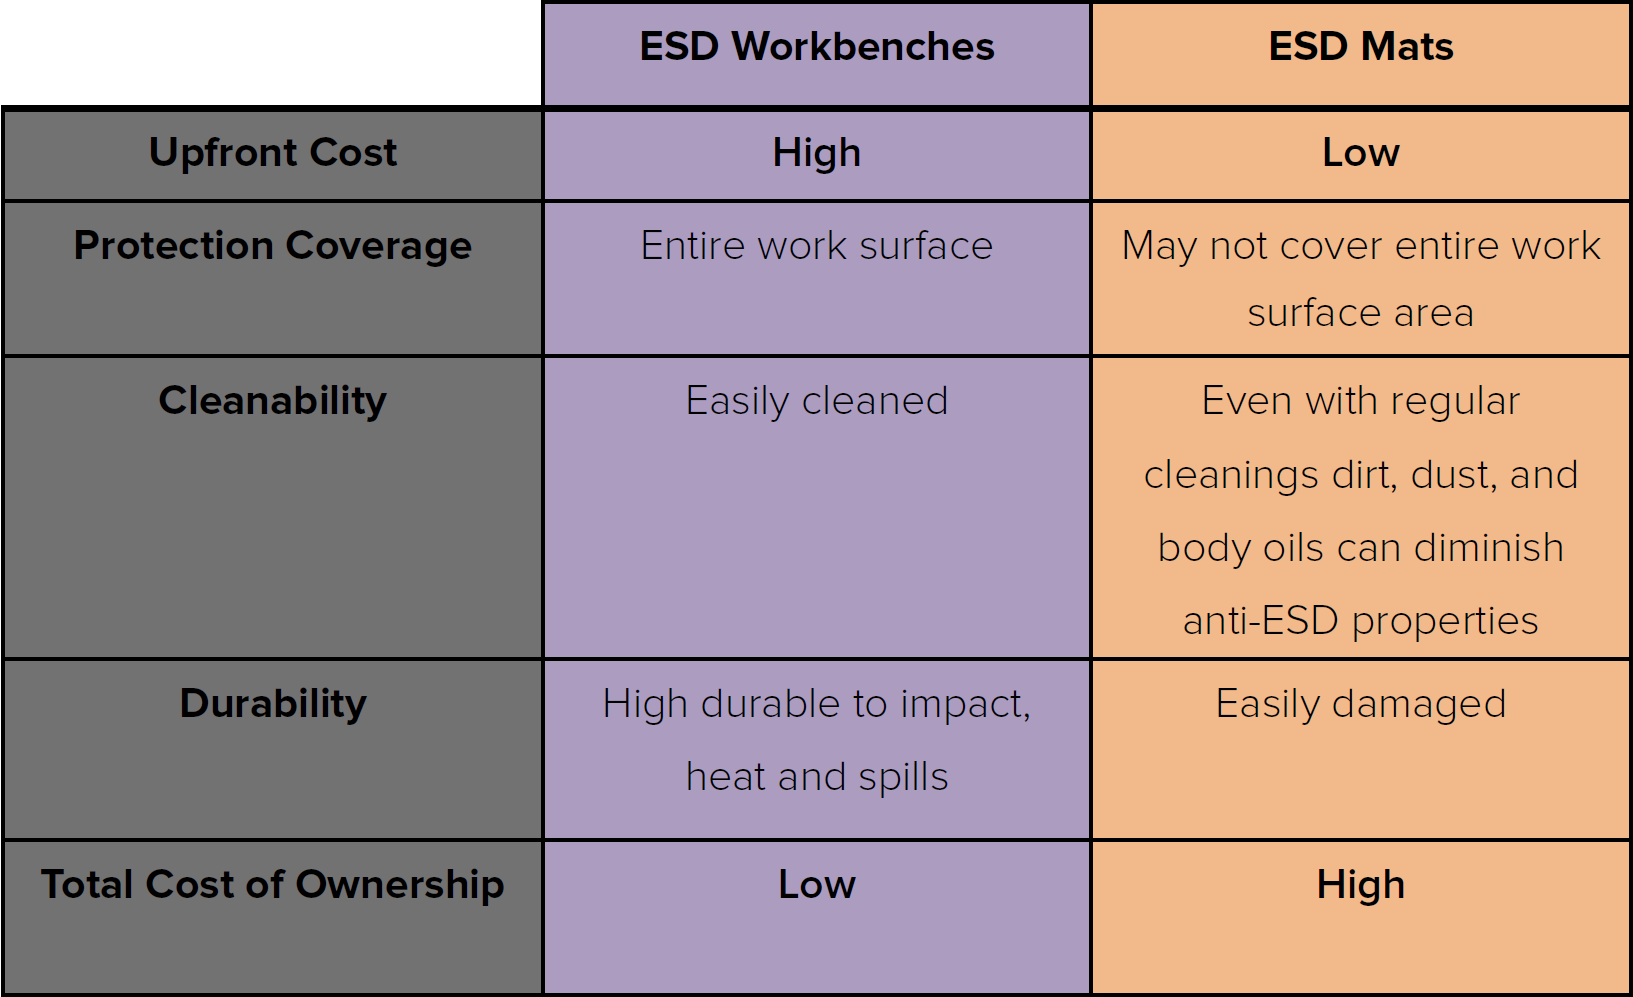 Table 1: Comparison of ESD workbenches and ESD mats